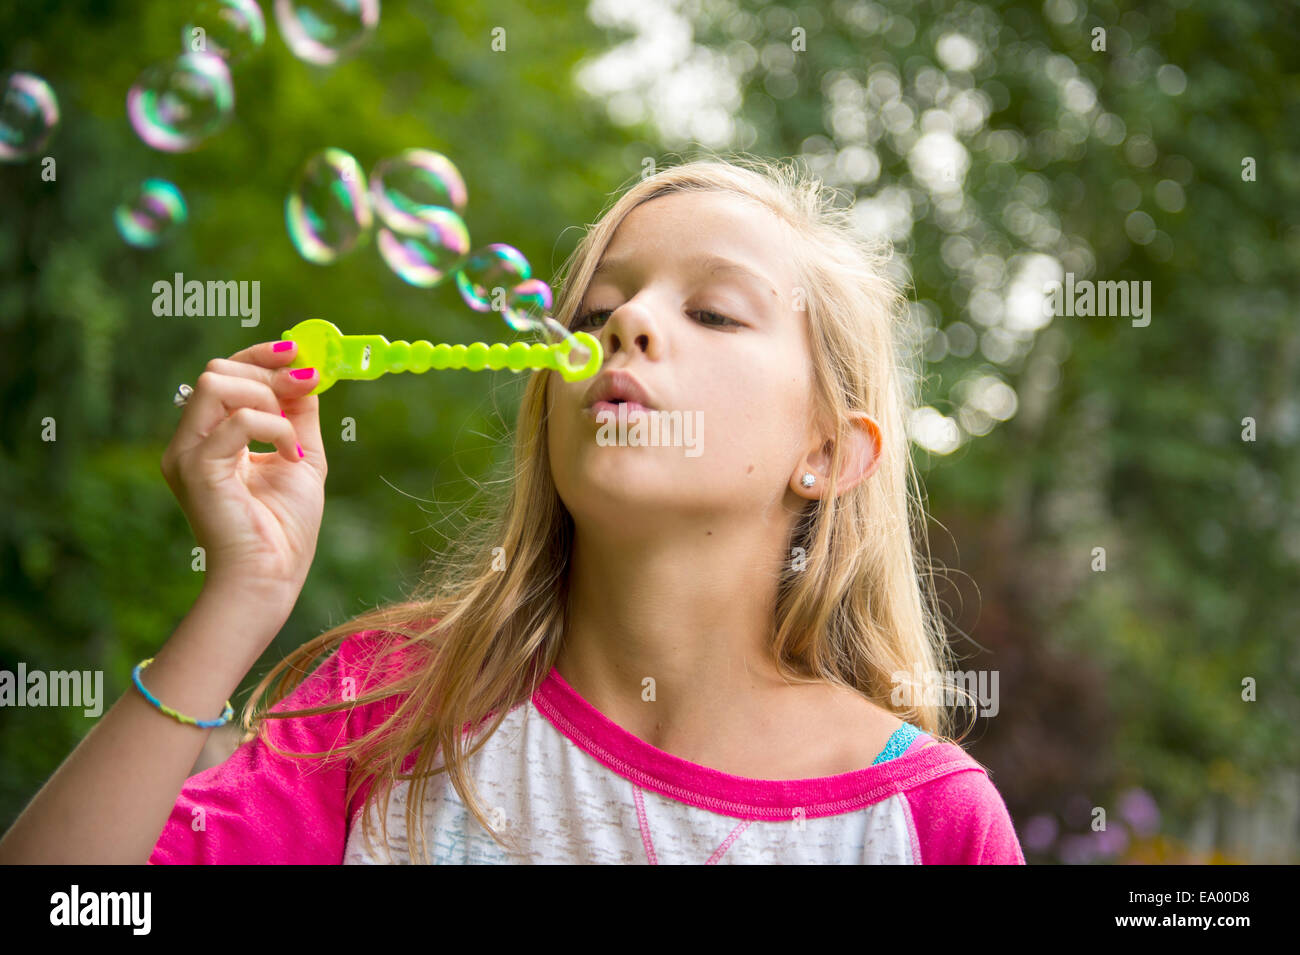 Girl blowing bubbles in garden Banque D'Images